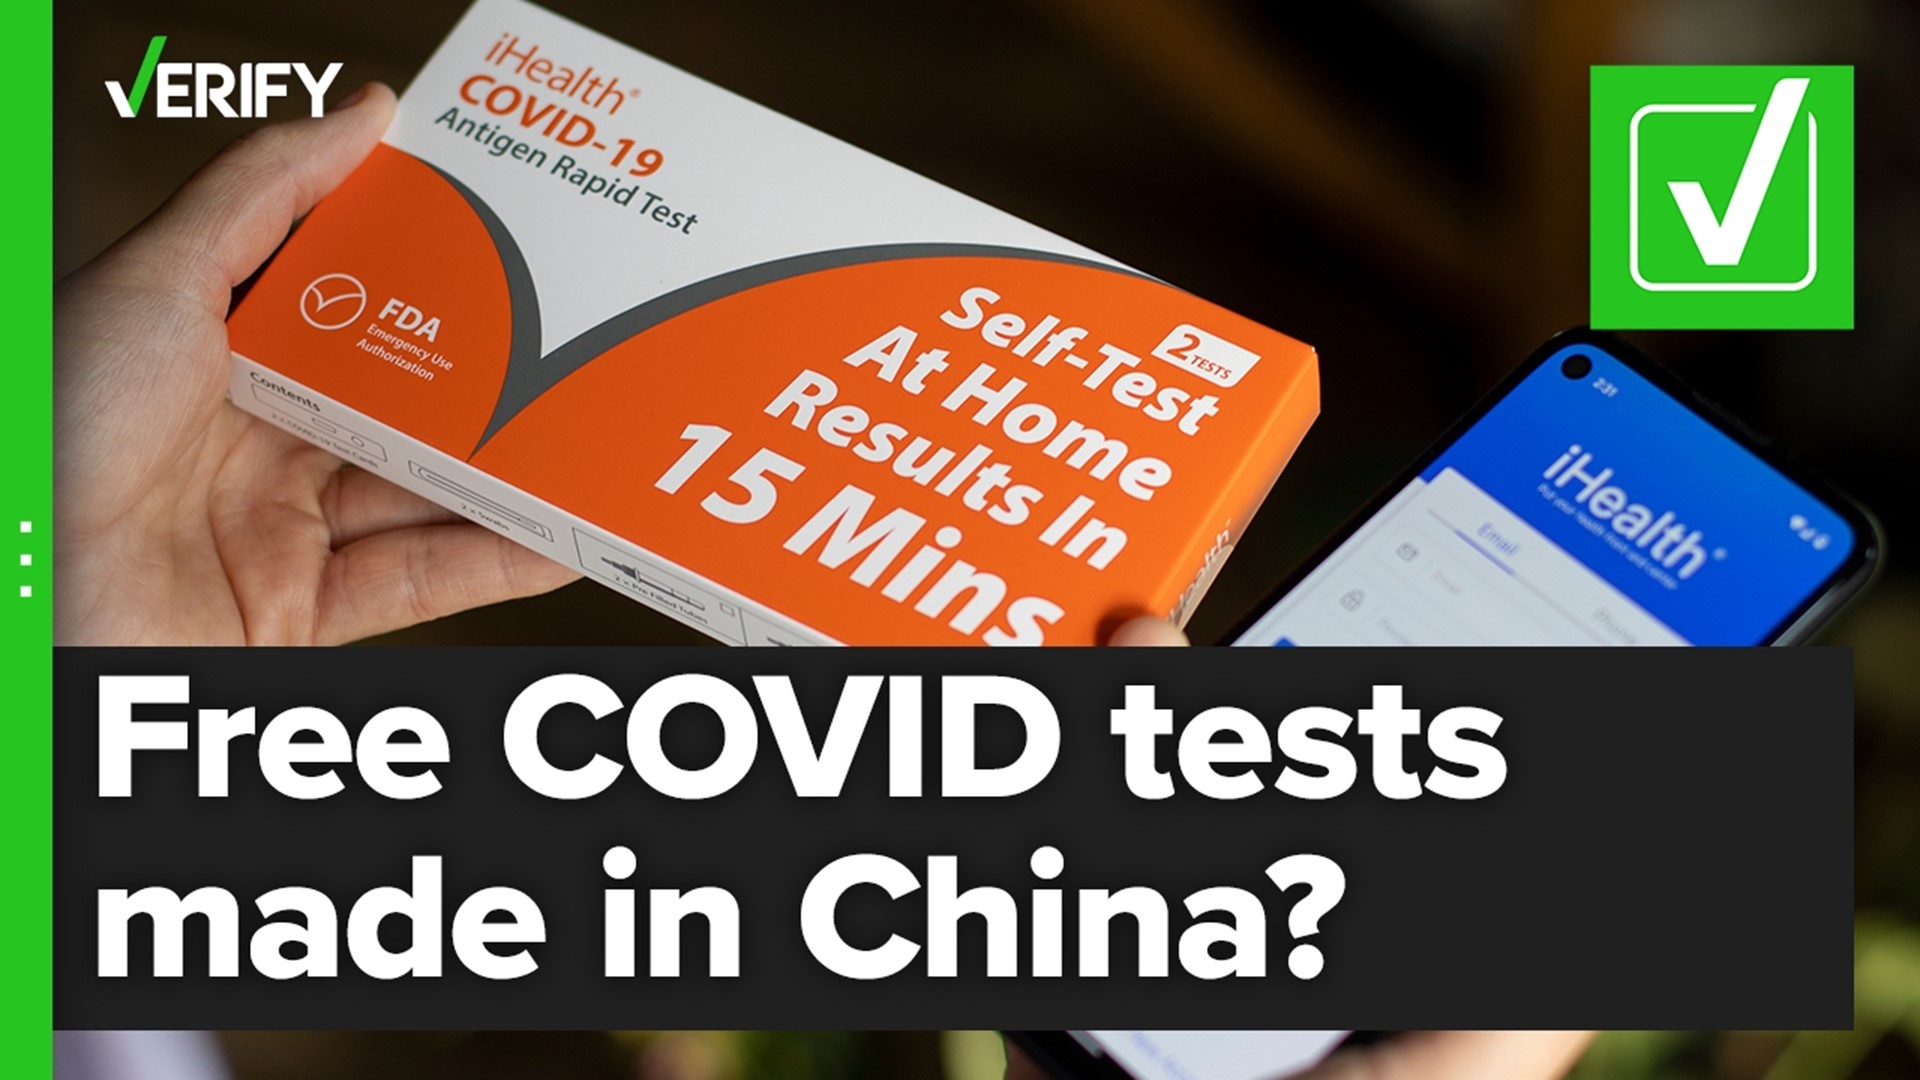 Some Free Government Covid Tests Made In China Verifythis Com